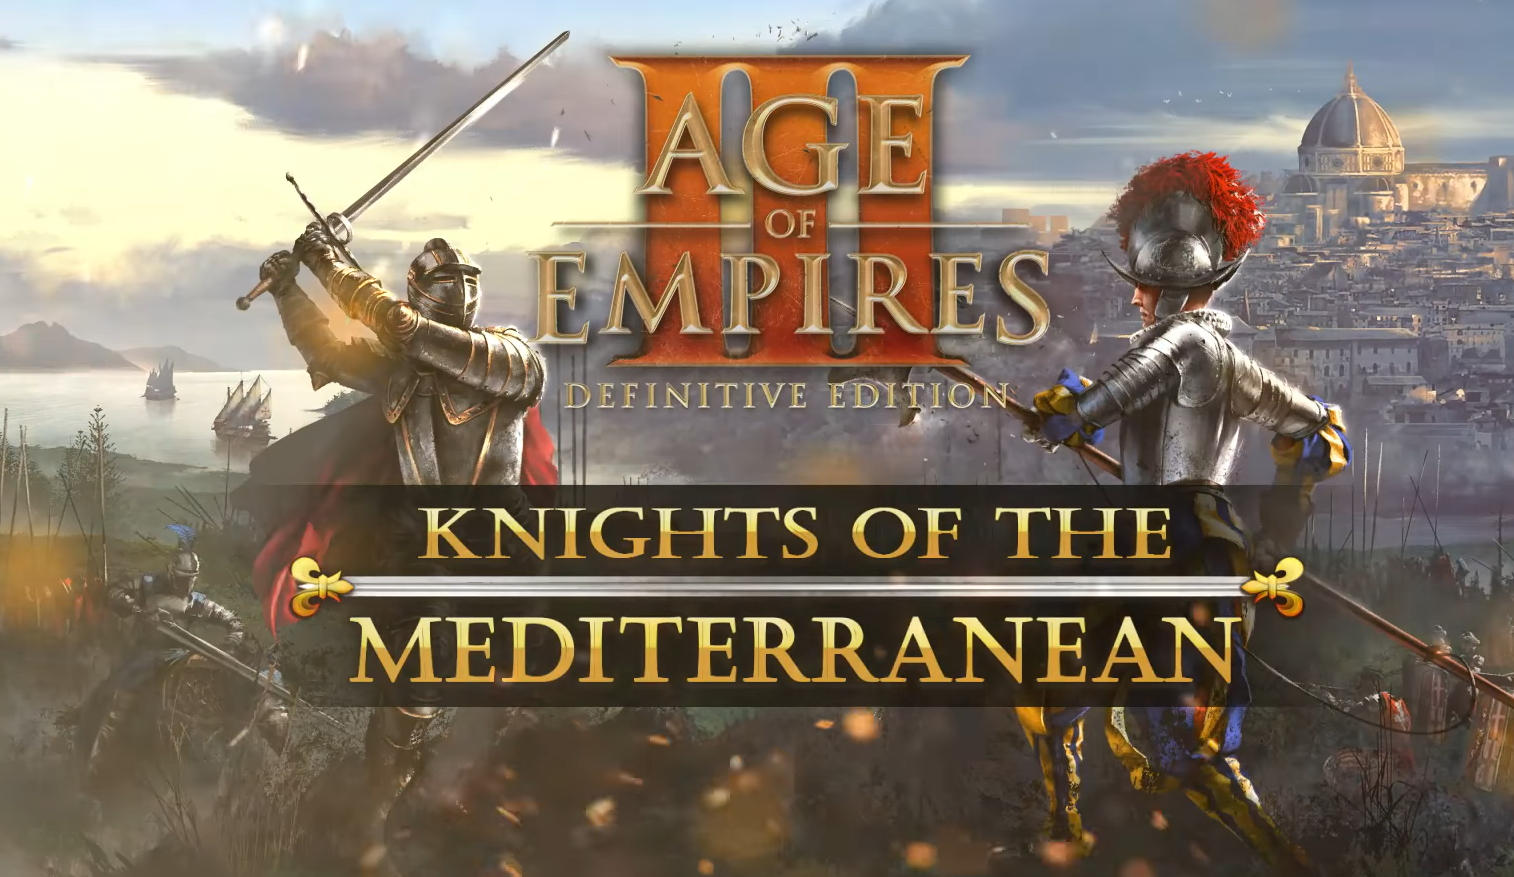 download age of empires 3 definitive edition knights of the mediterranean for free